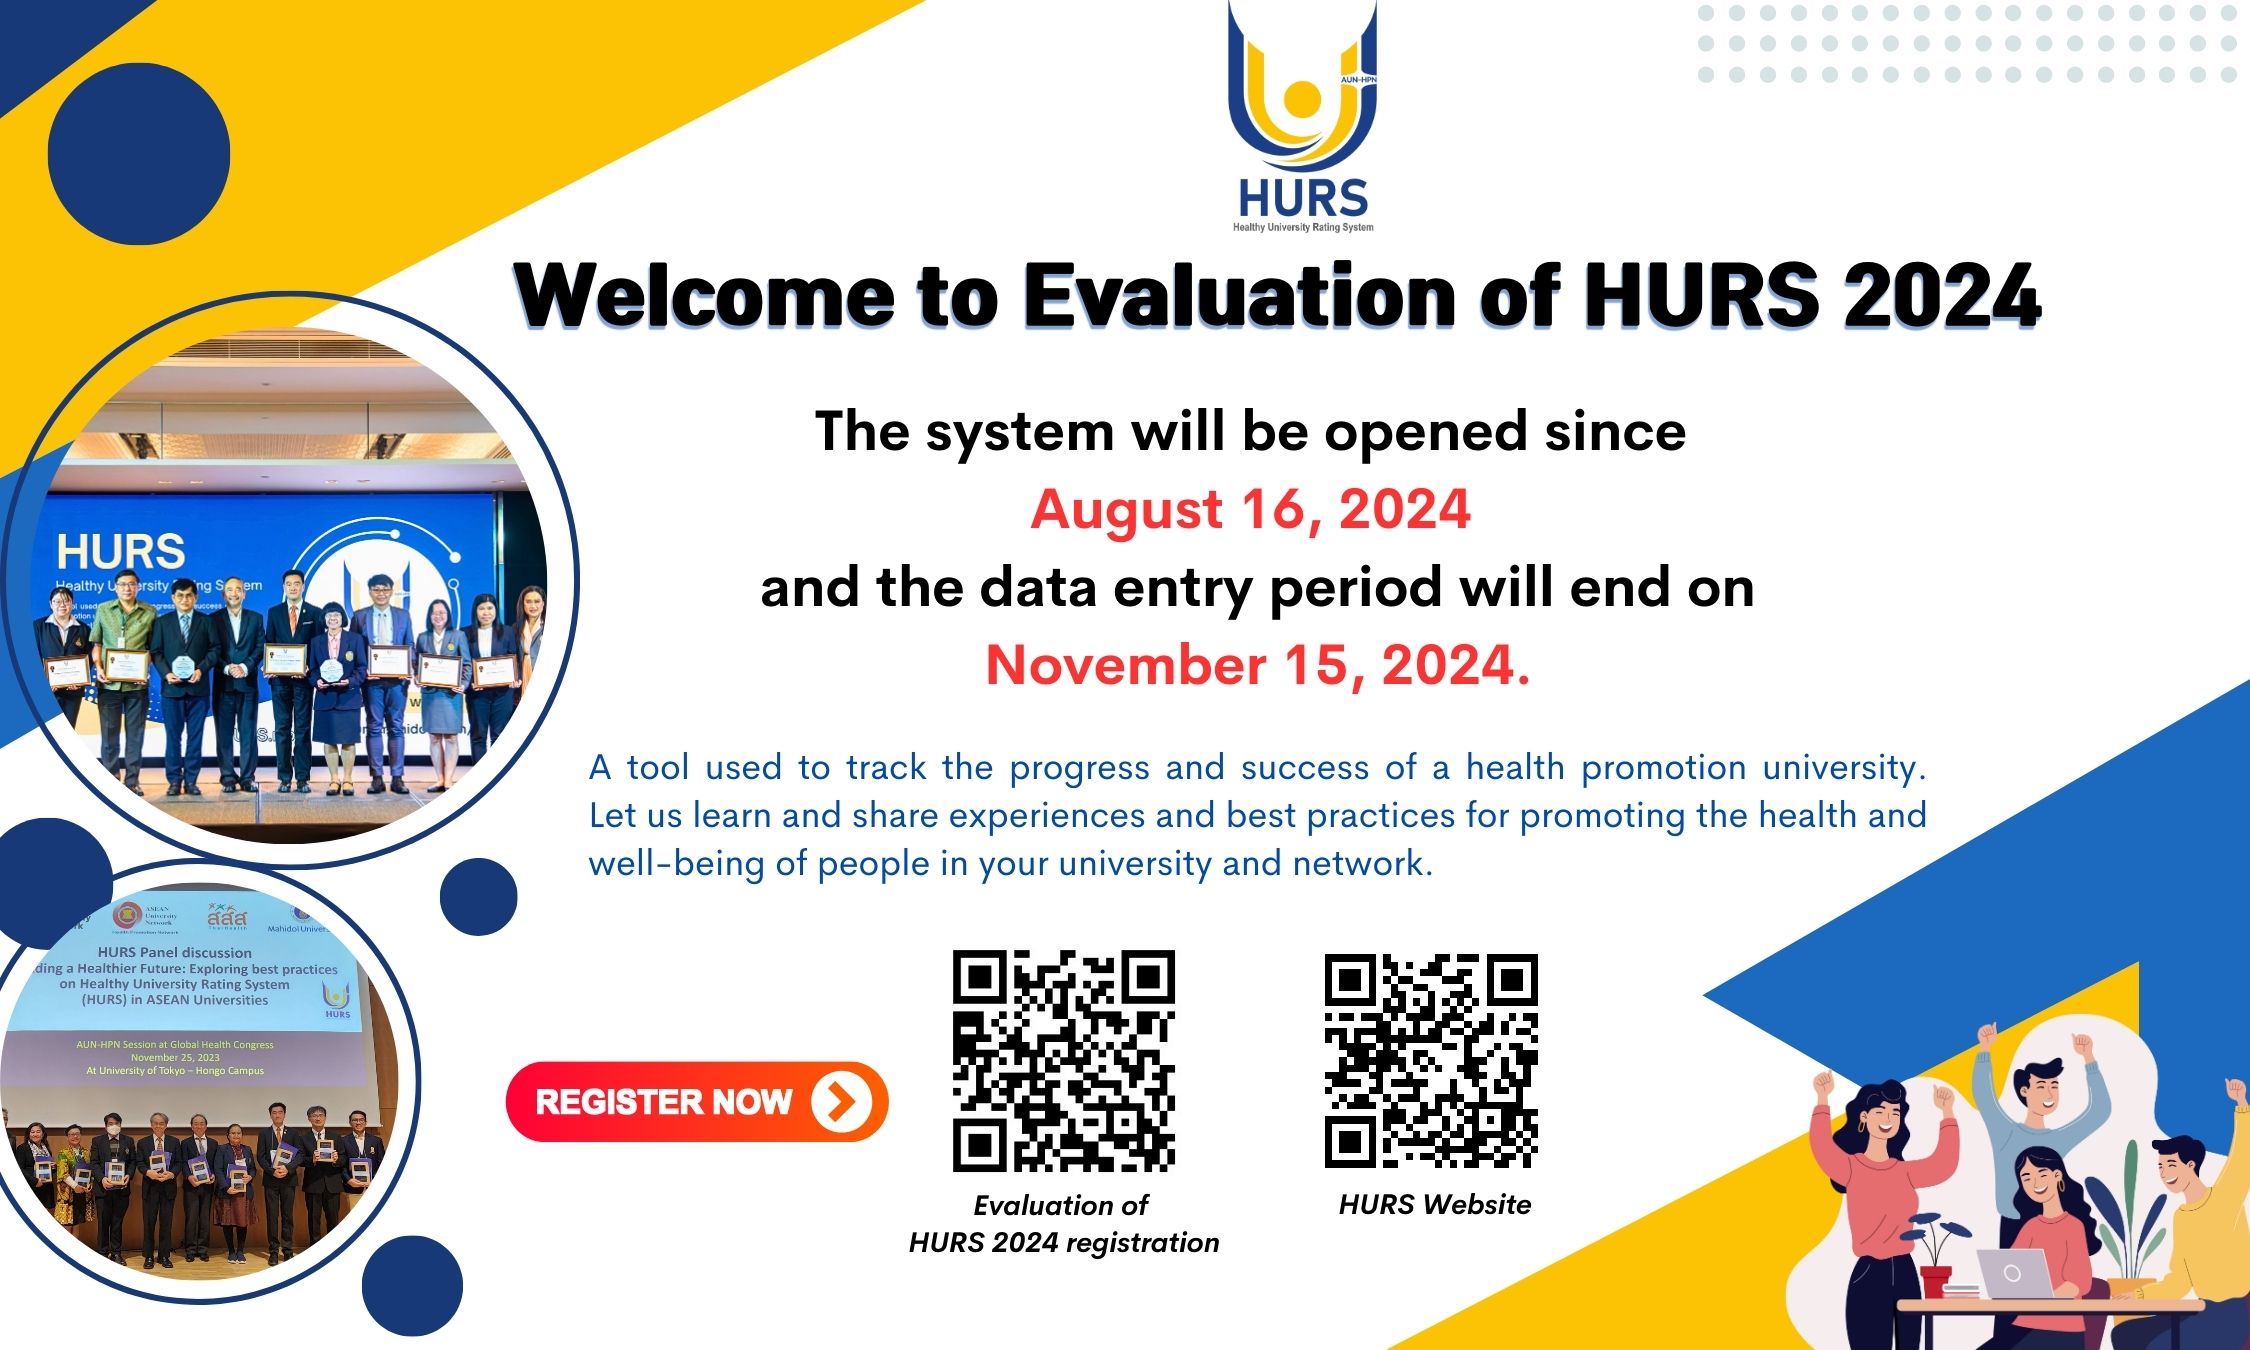 Welcome to Evaluation of HURS 2024